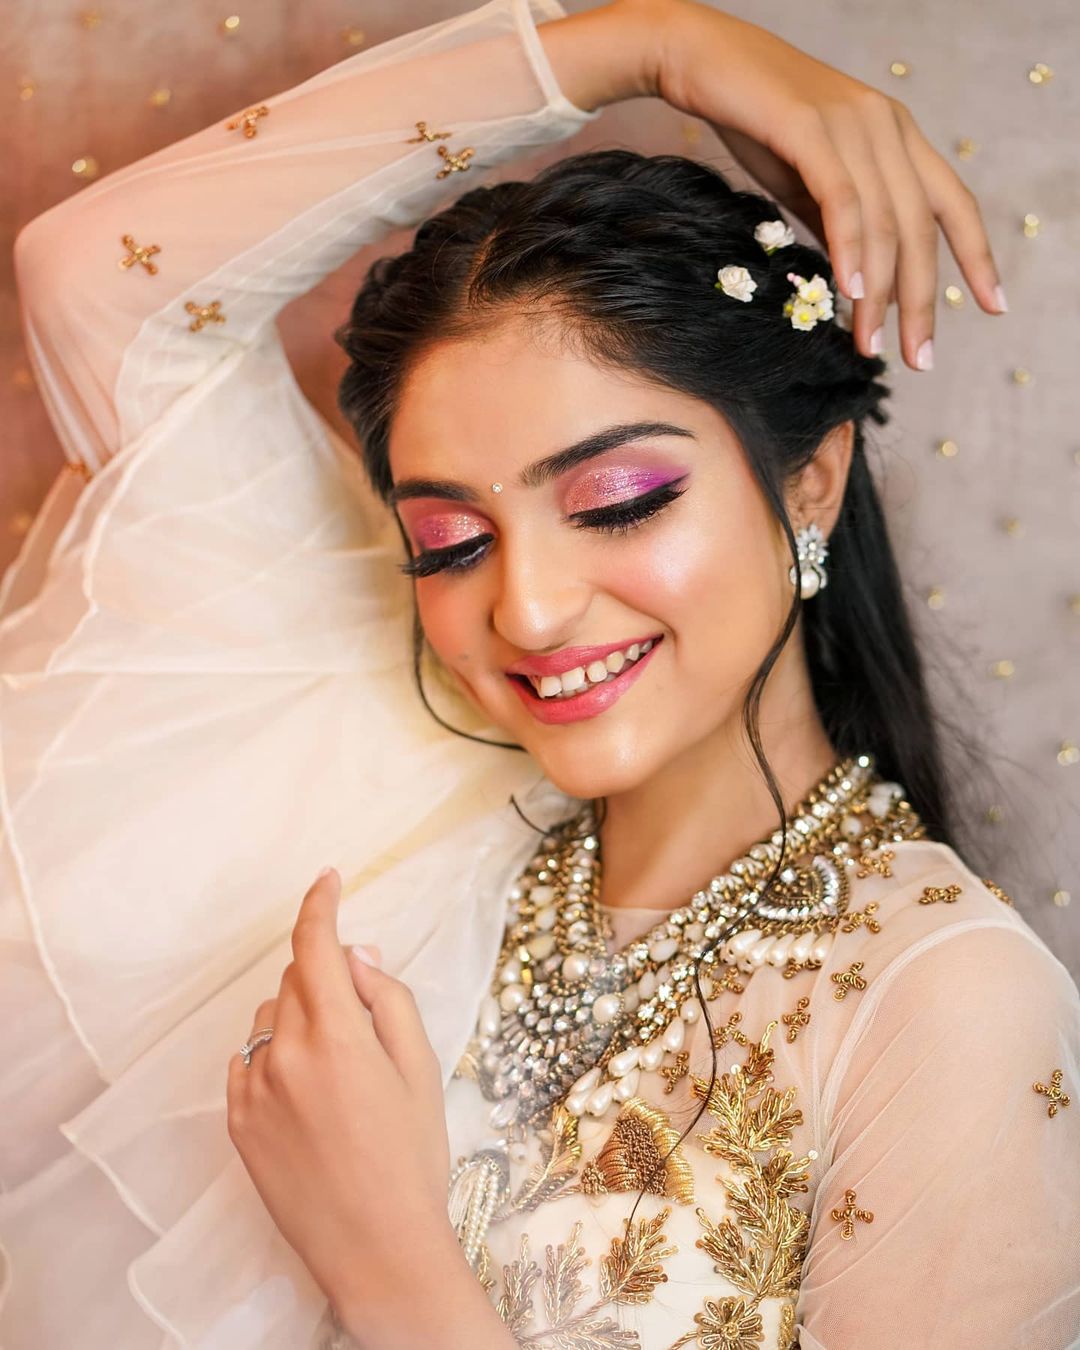 What Is The Best Makeup In An Indian Wedding?